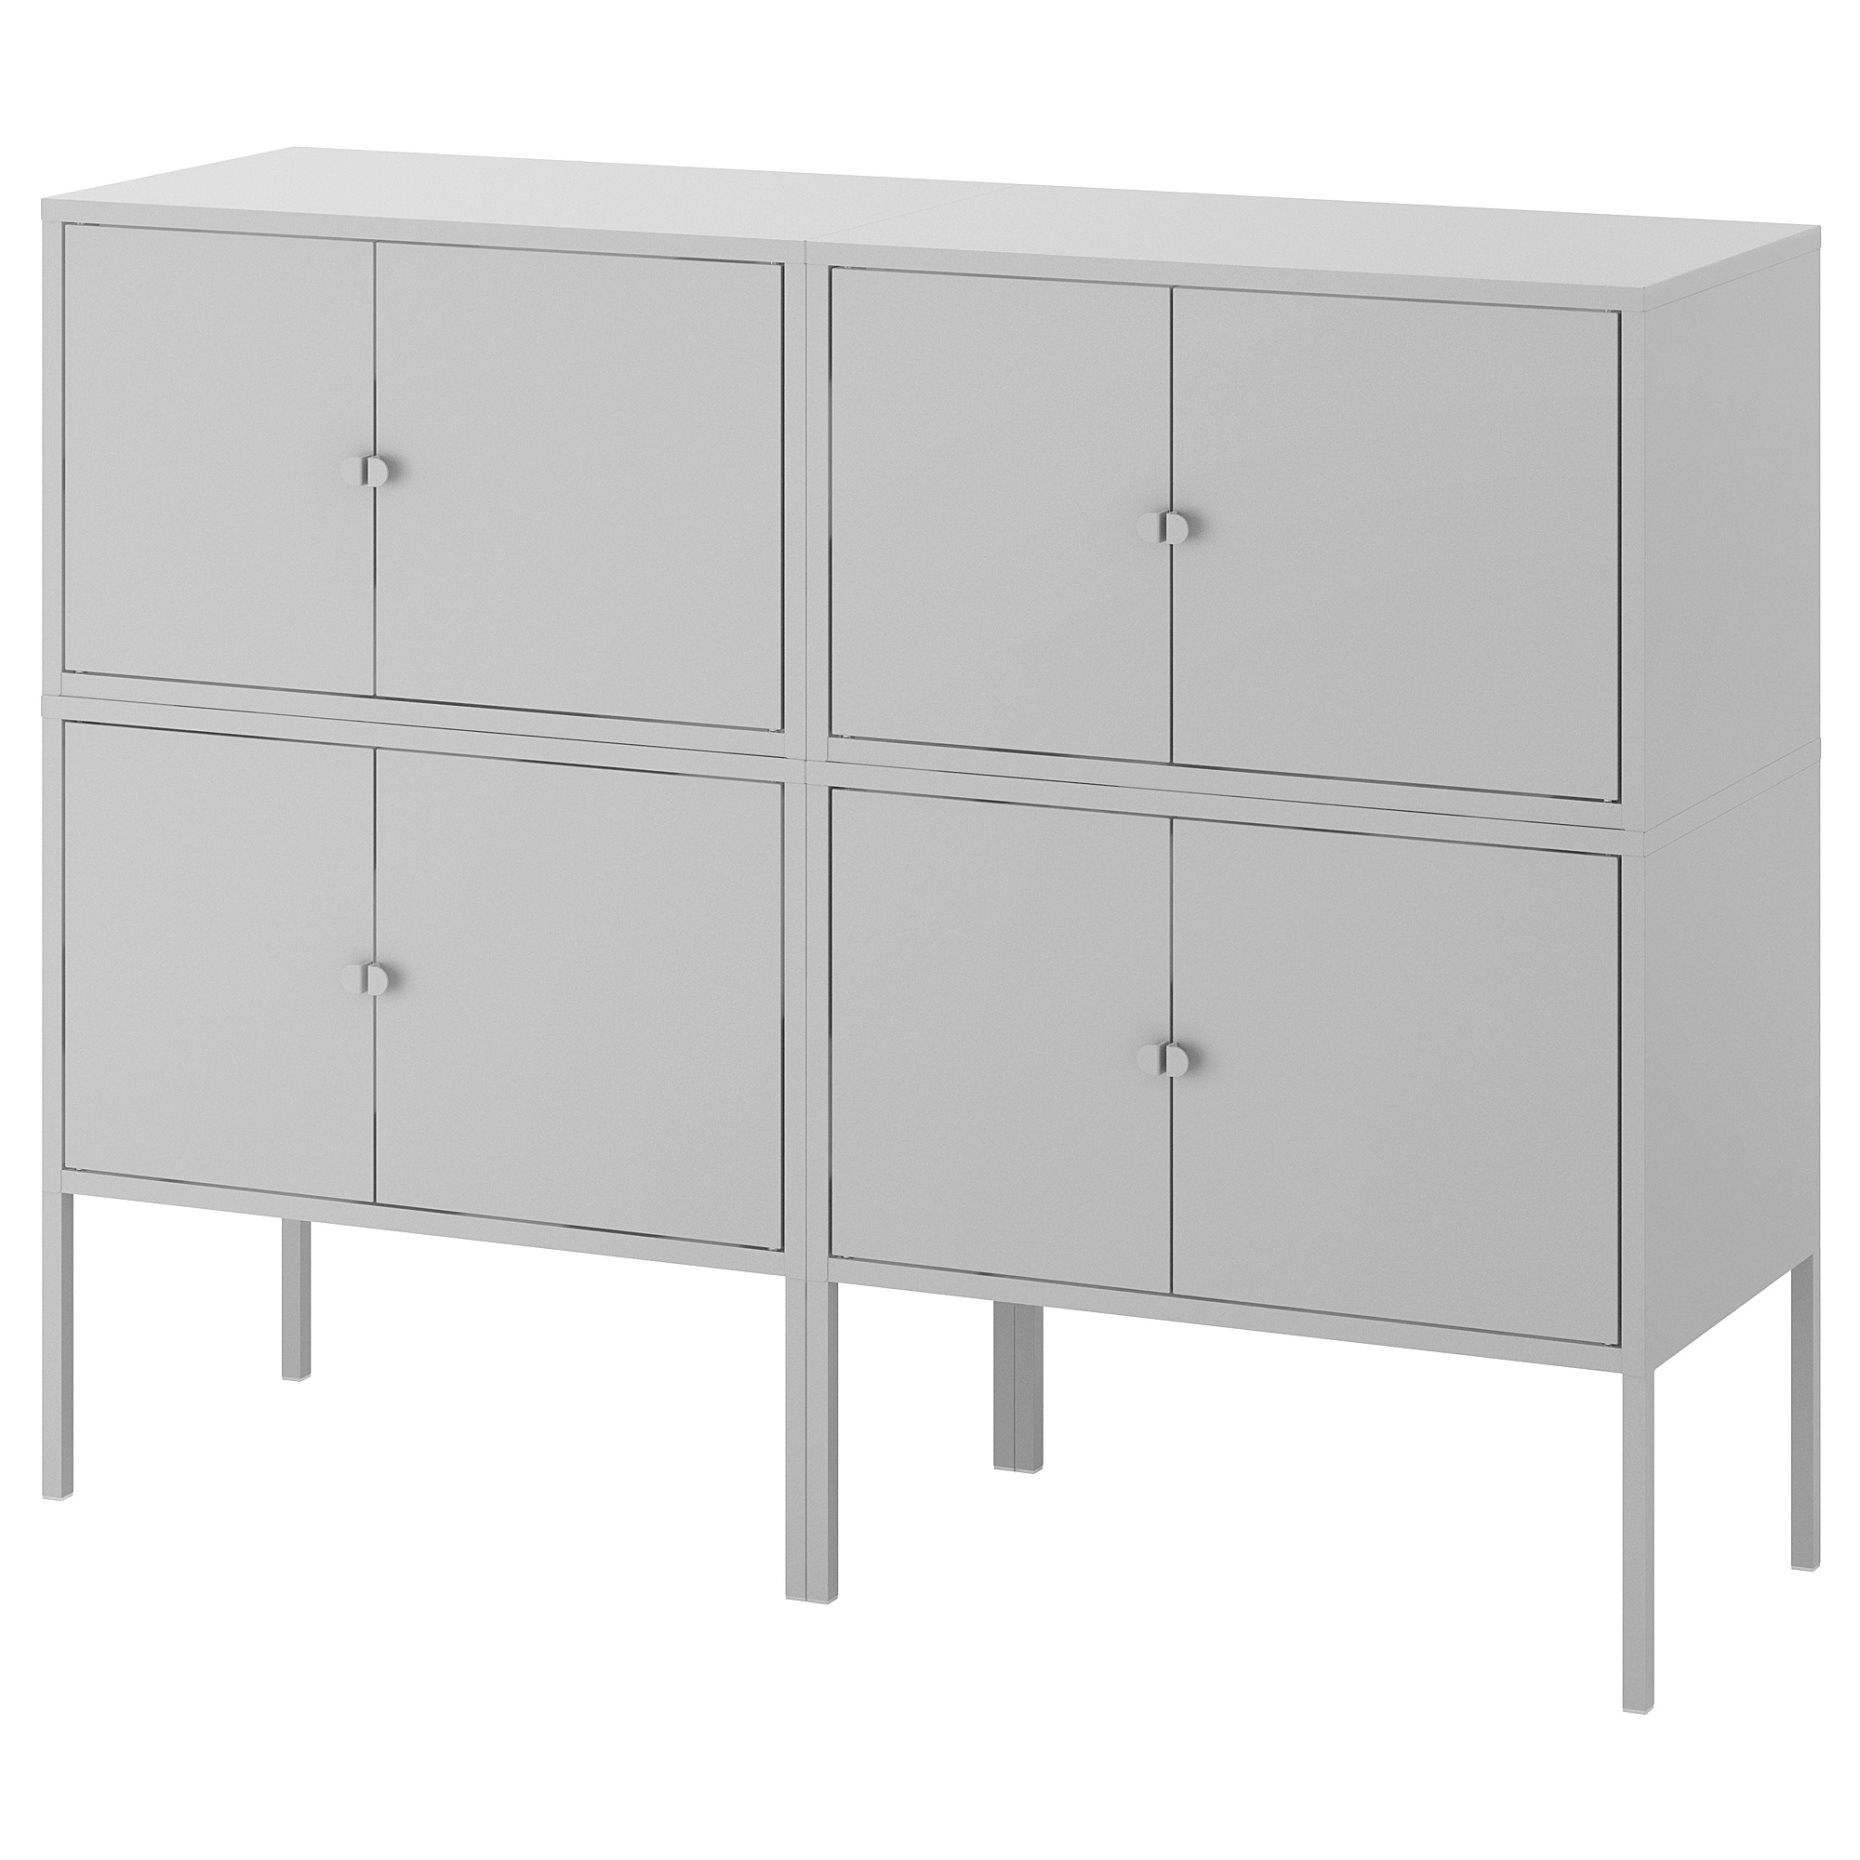 LIXHULT, cabinet combination, 292.791.86